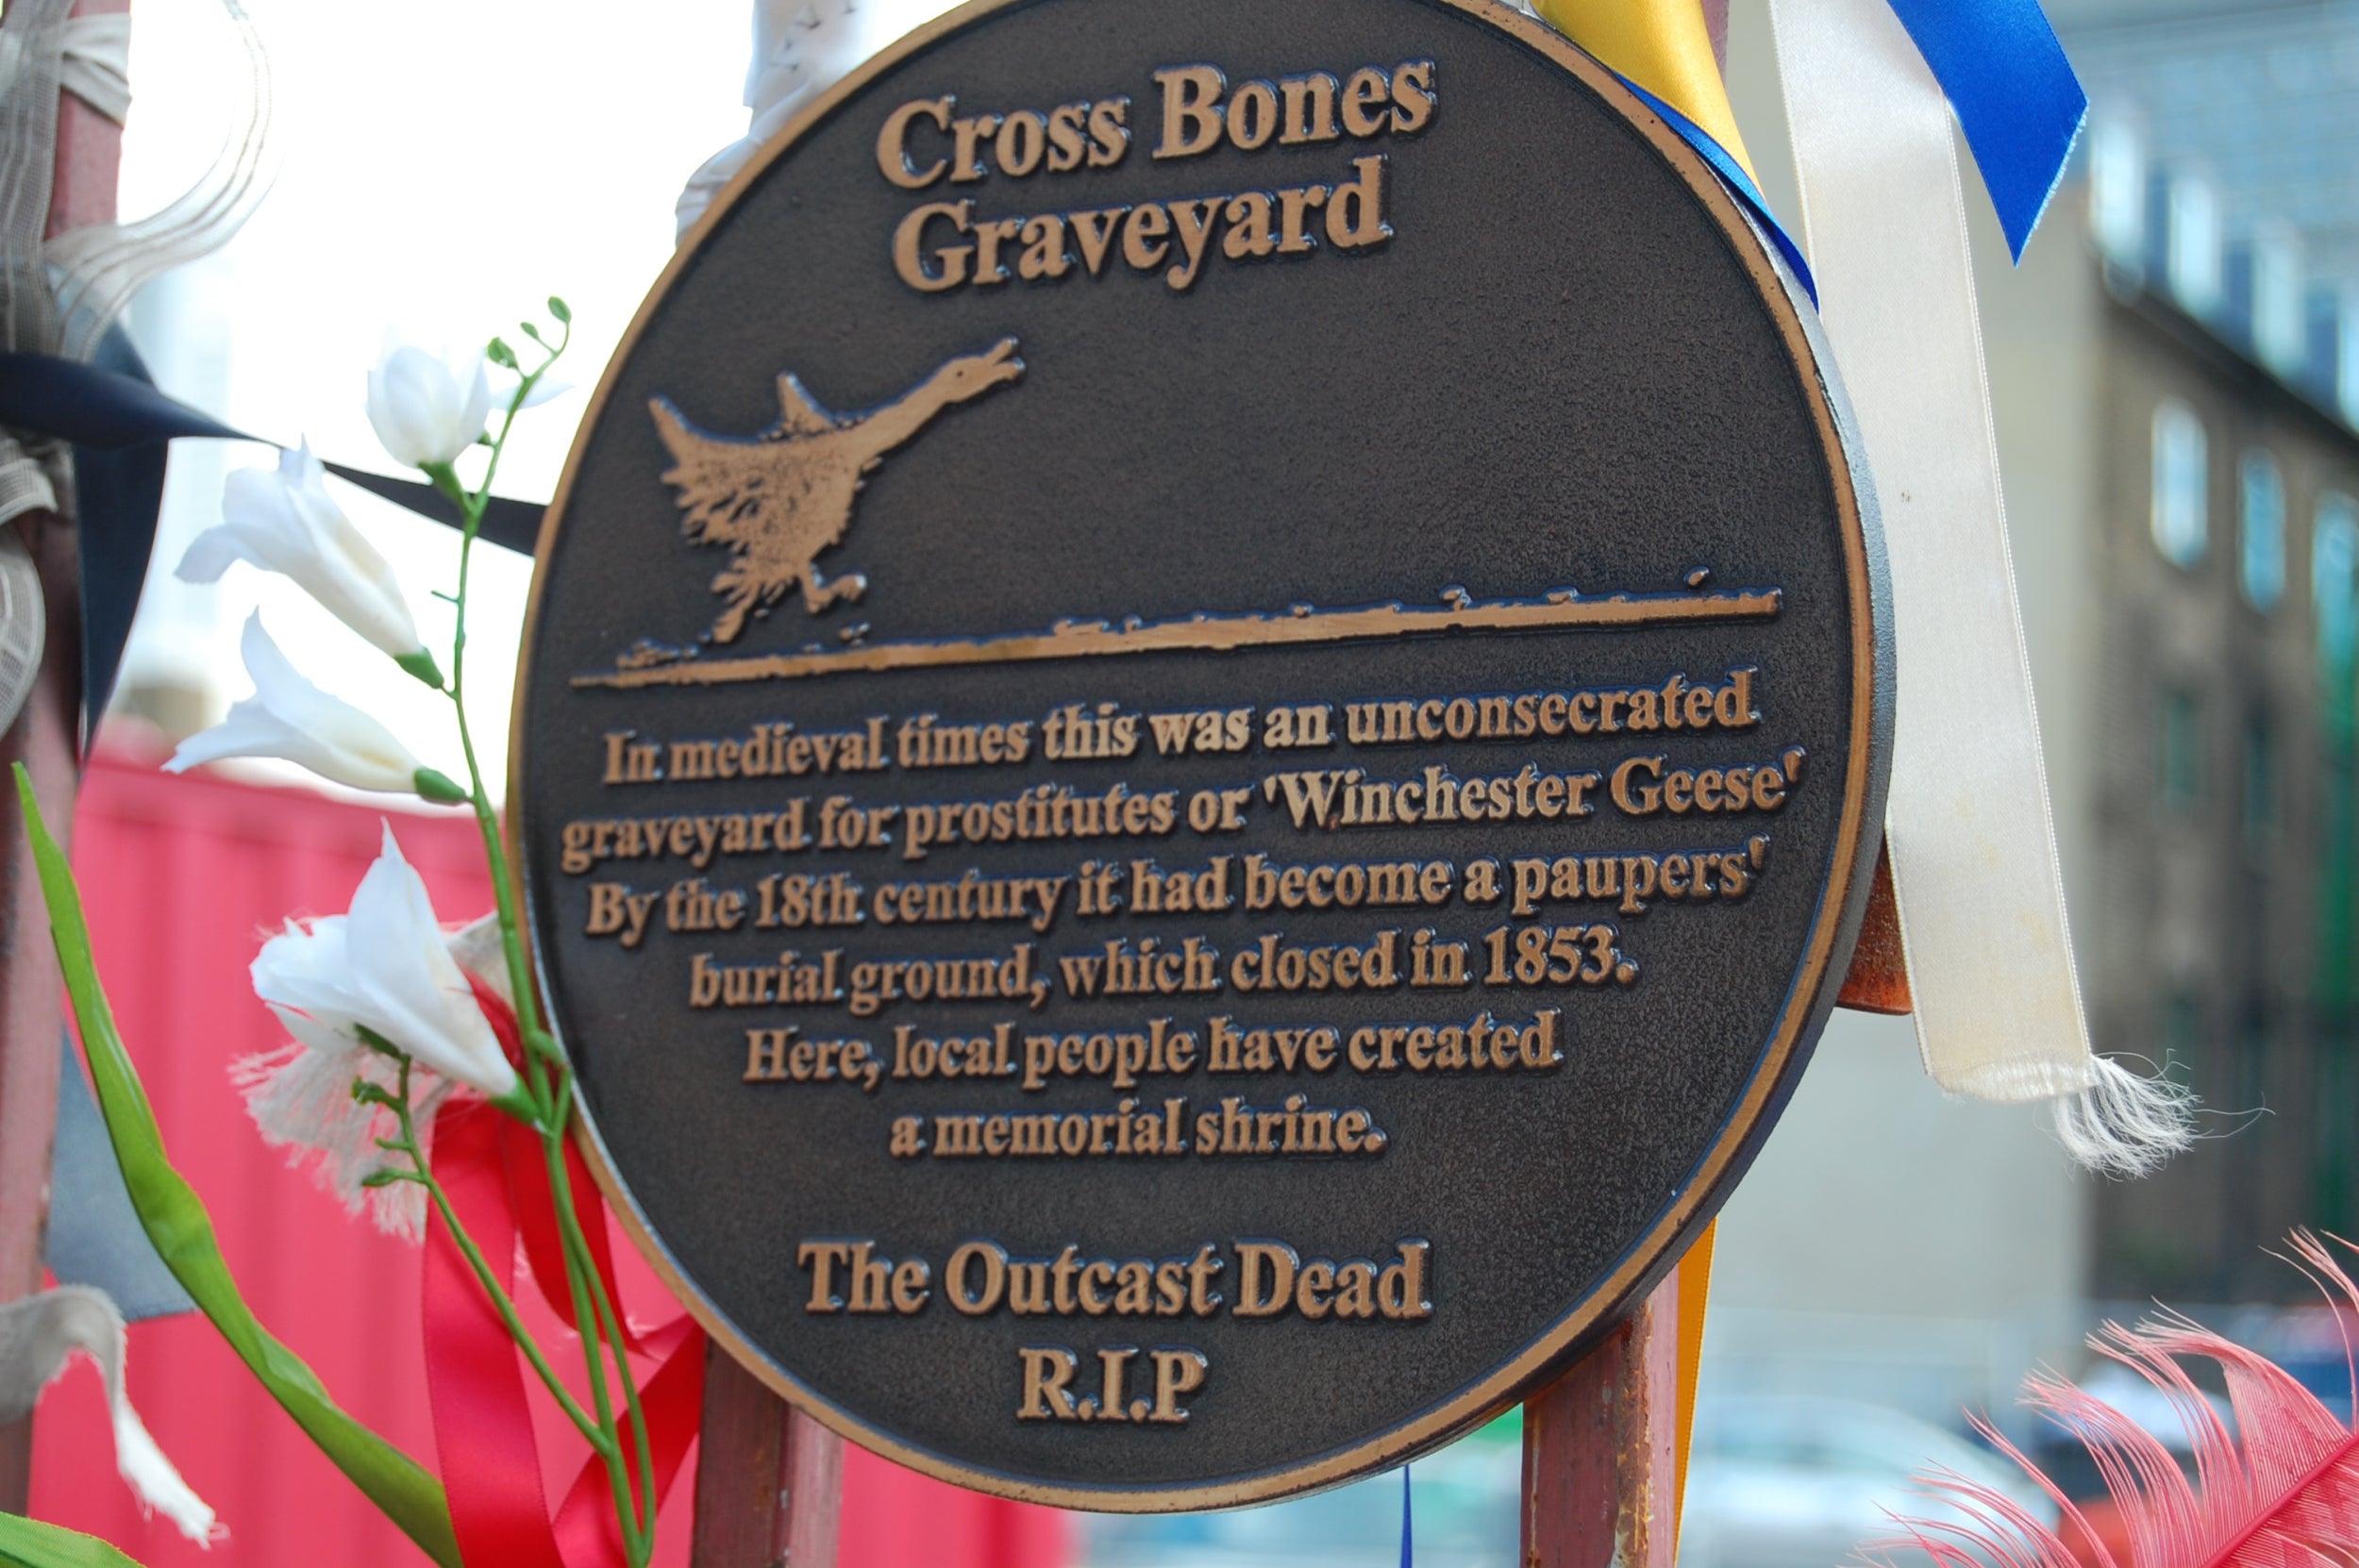 Cross Bones Graveyard: honouring the paupers and prostitutes who made up the ‘Outcast Dead’ (David Merrigan/Flickr)